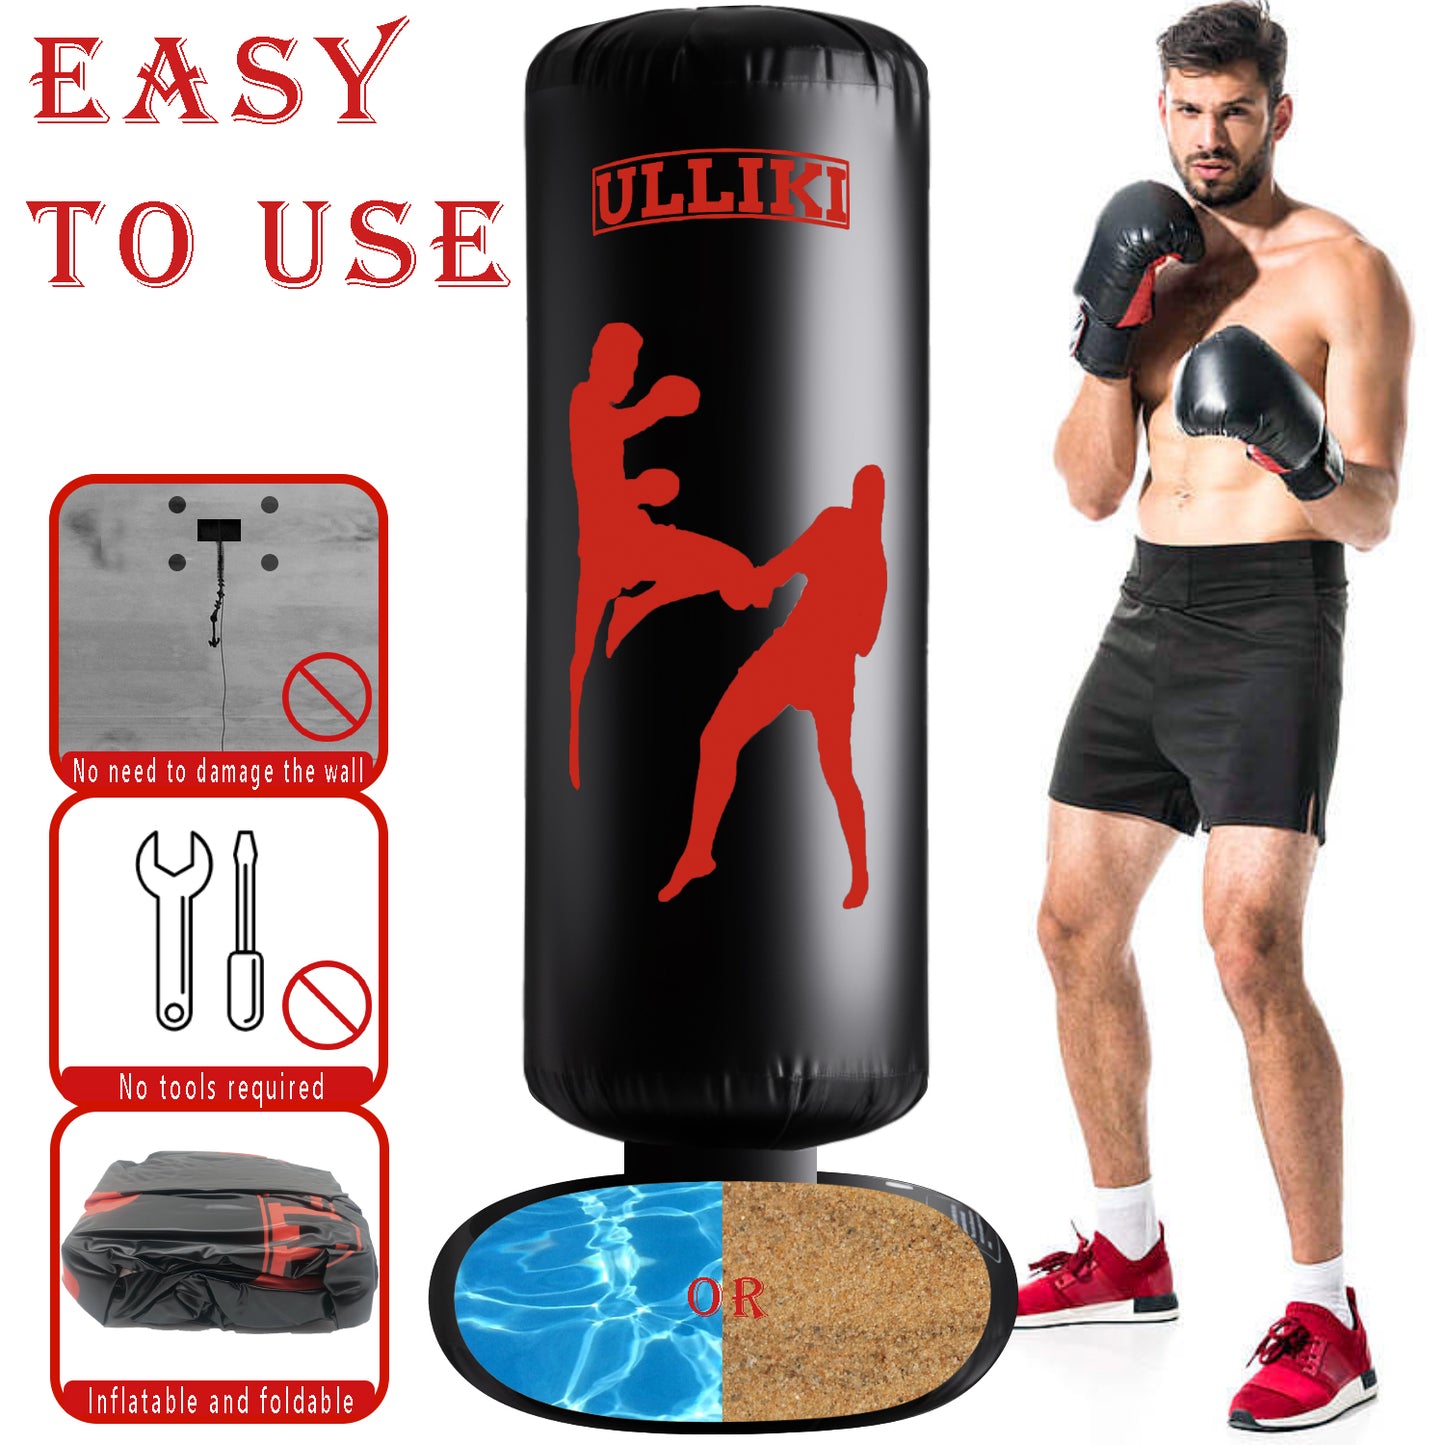 ULLIKI 65" Punching Bag for Adults and Kids with Gloves - Freestanding Heavy Boxing Bag, Inflatable Boxing Training Equipment Practice Daily Boxing Activities Gift for Kids, Men, Women, boy, Girl